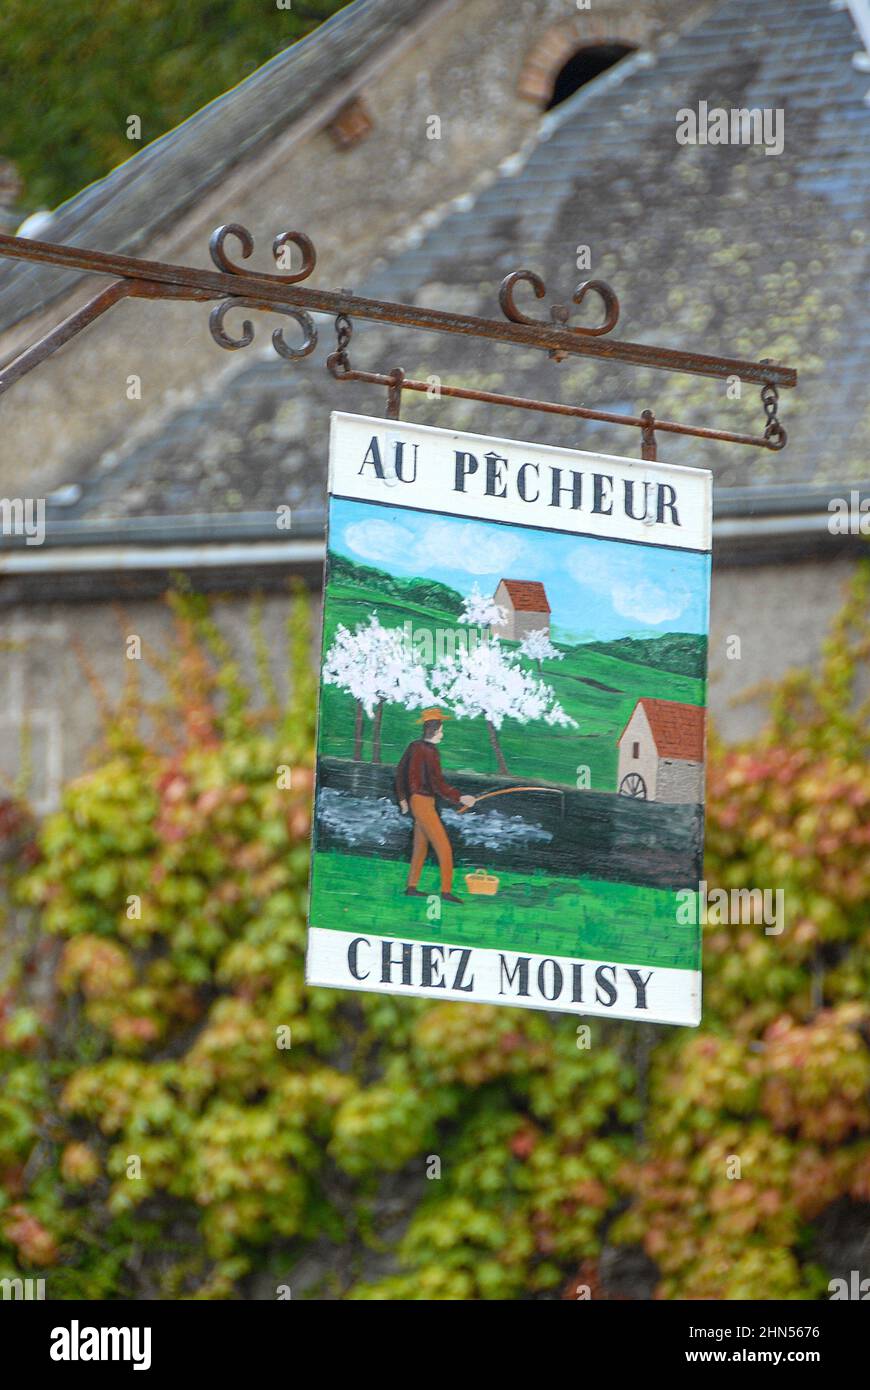 The auberge des Sœurs Moisy was made by painters who met, slept and worked there at St-Céneri-le-Gérei, Normandy, France Stock Photo